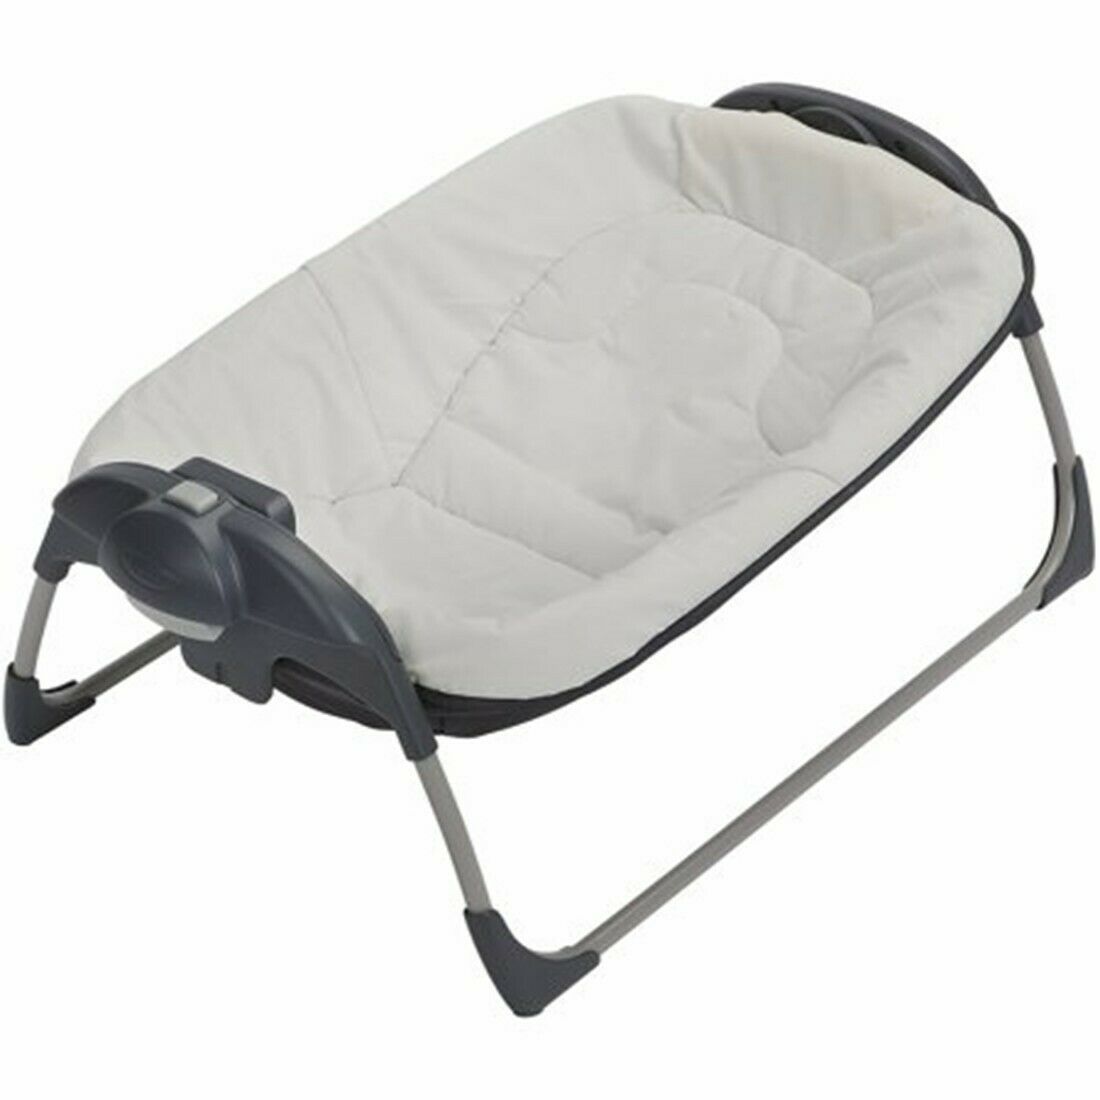 Baby Stroller with Car Seat Travel System Playard Infant Chair Bouncer Combo New